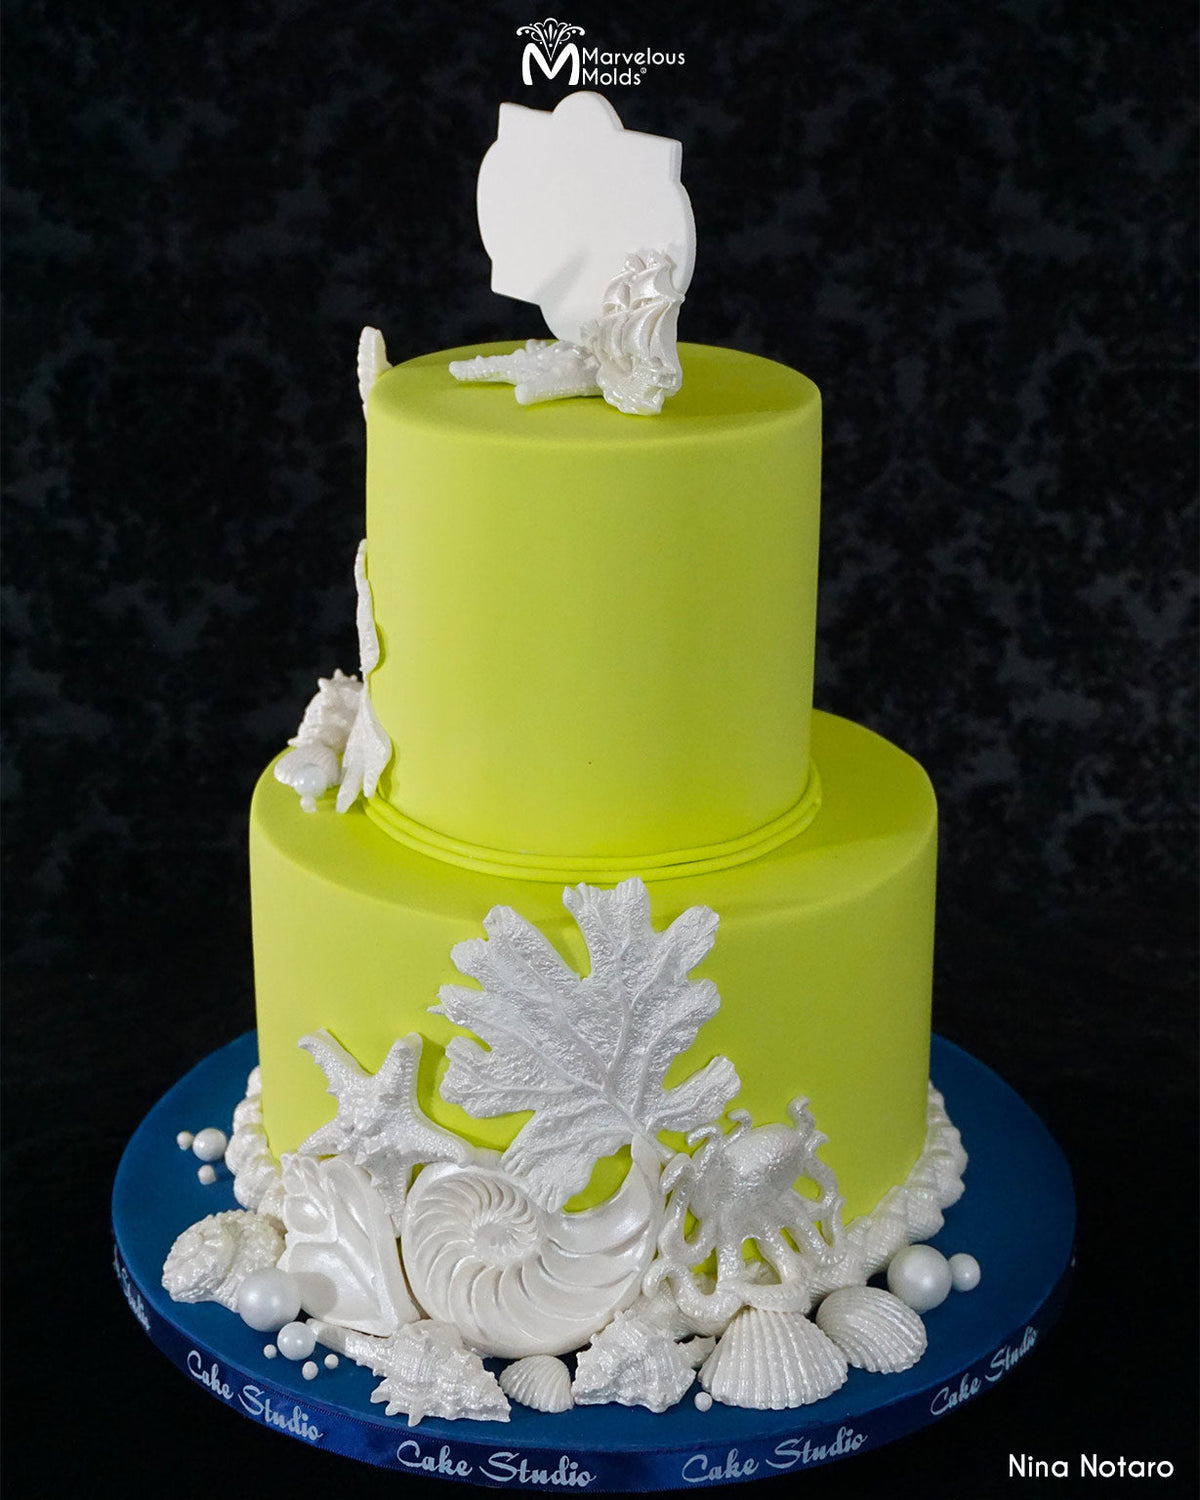 Lime Colored Beach Shell Wedding Cake Decorated with Marvelous Molds Medium Cockle Shells Silicone Mold